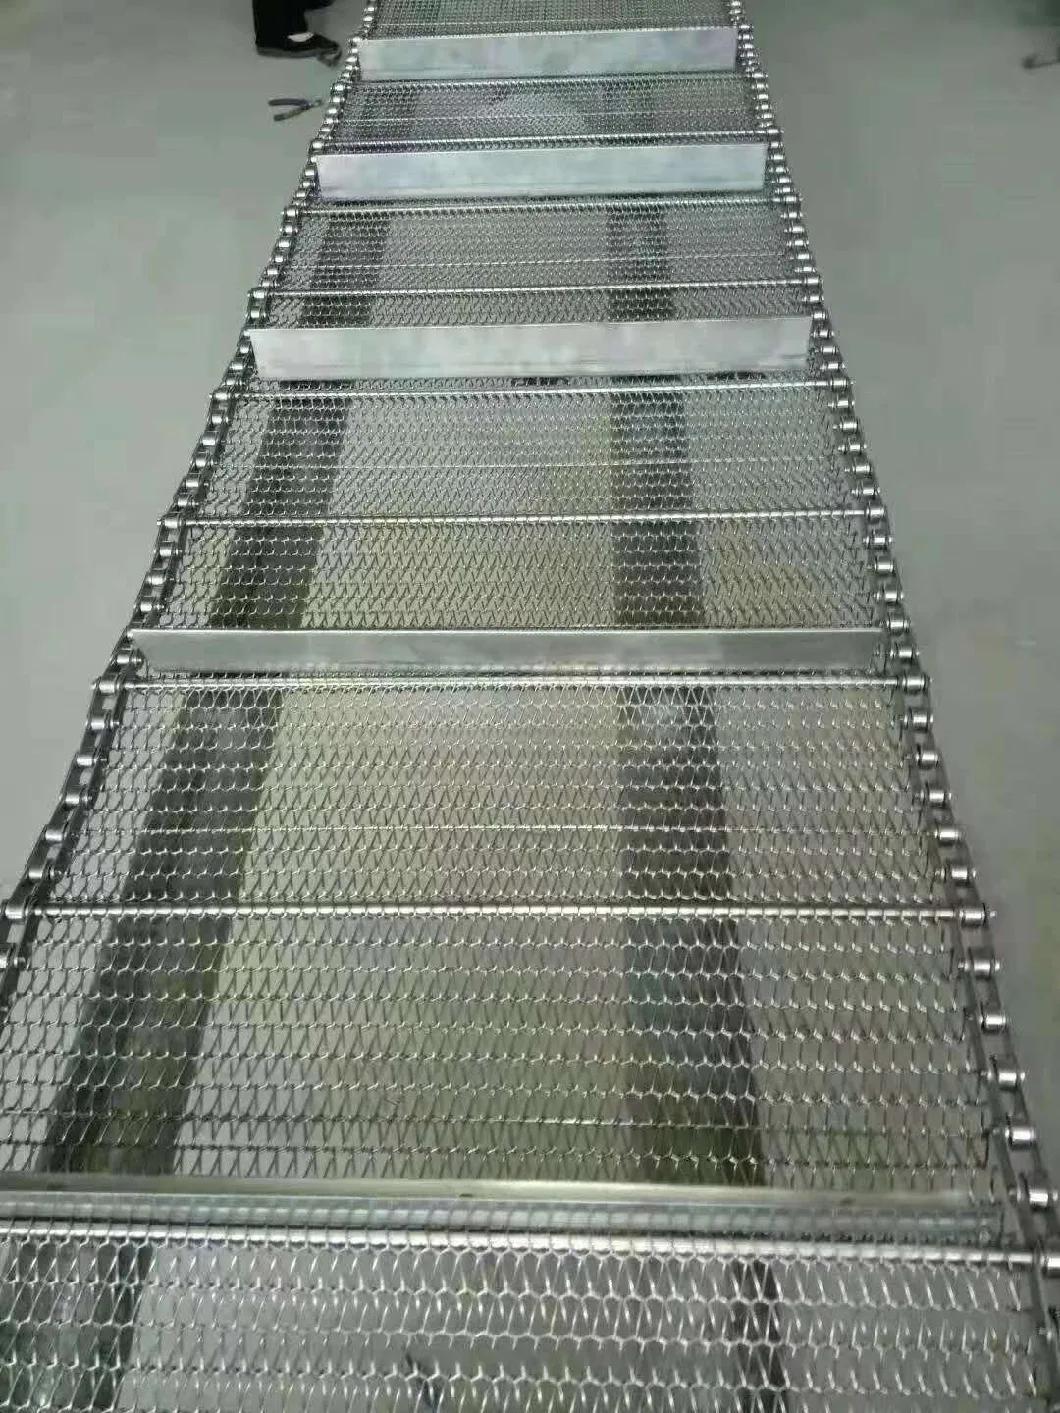 Stainless Steel Chain Conveyor Belt for Tuunel Oven, Wasing, Drying Equipment